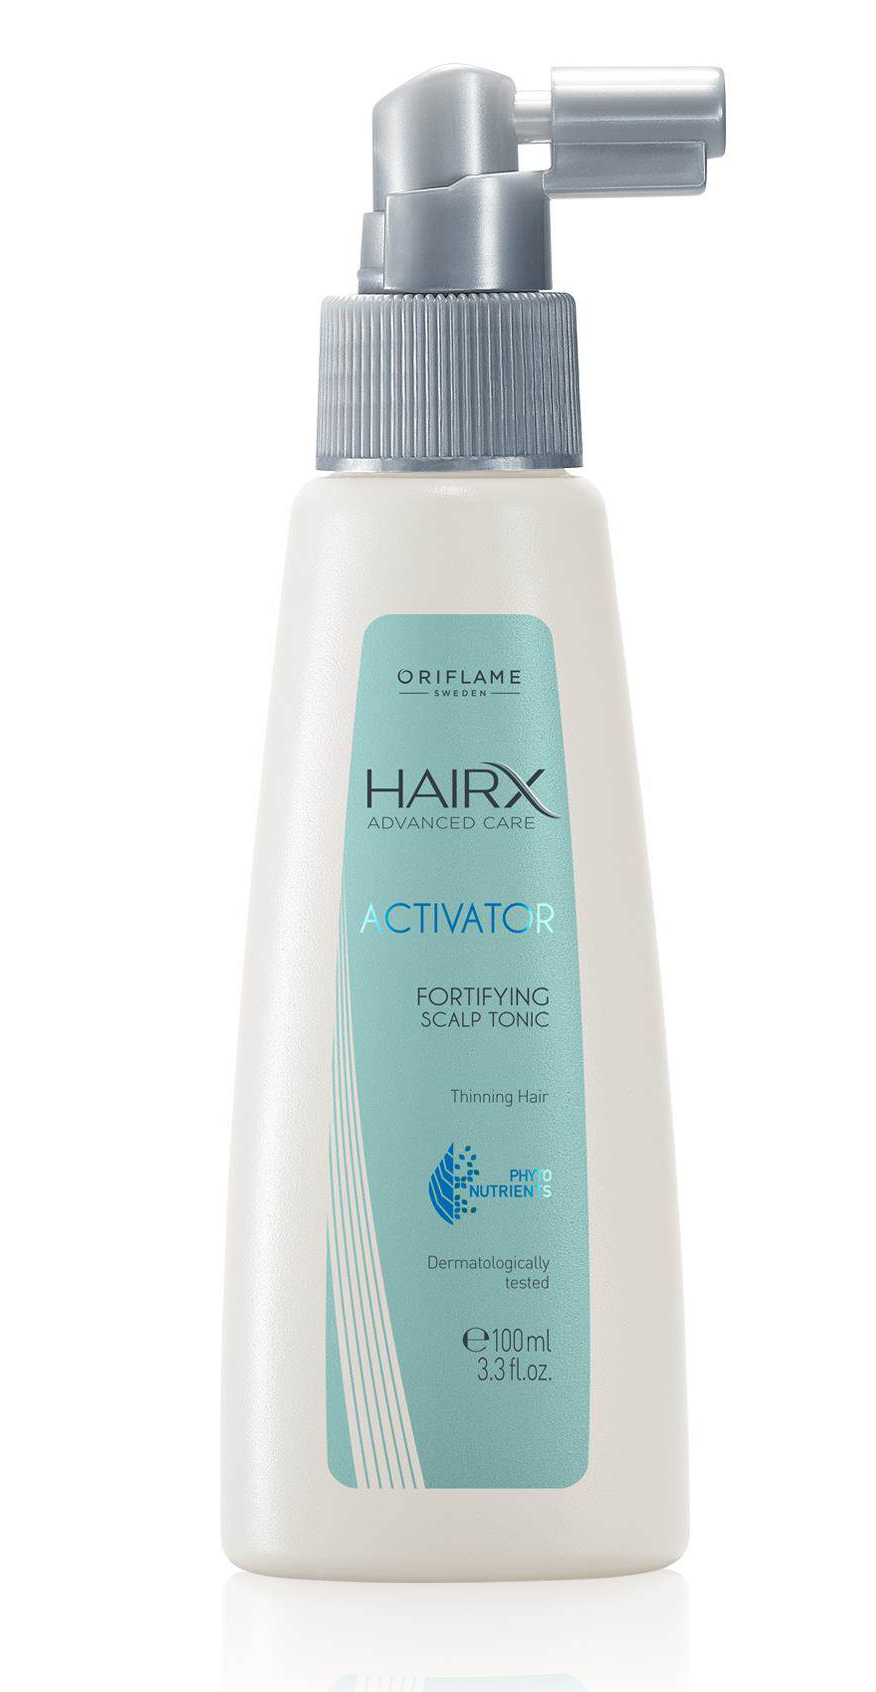 Oriflame Sweden HAIRX Advanced Care Activator Fortifying Scalp Tonic